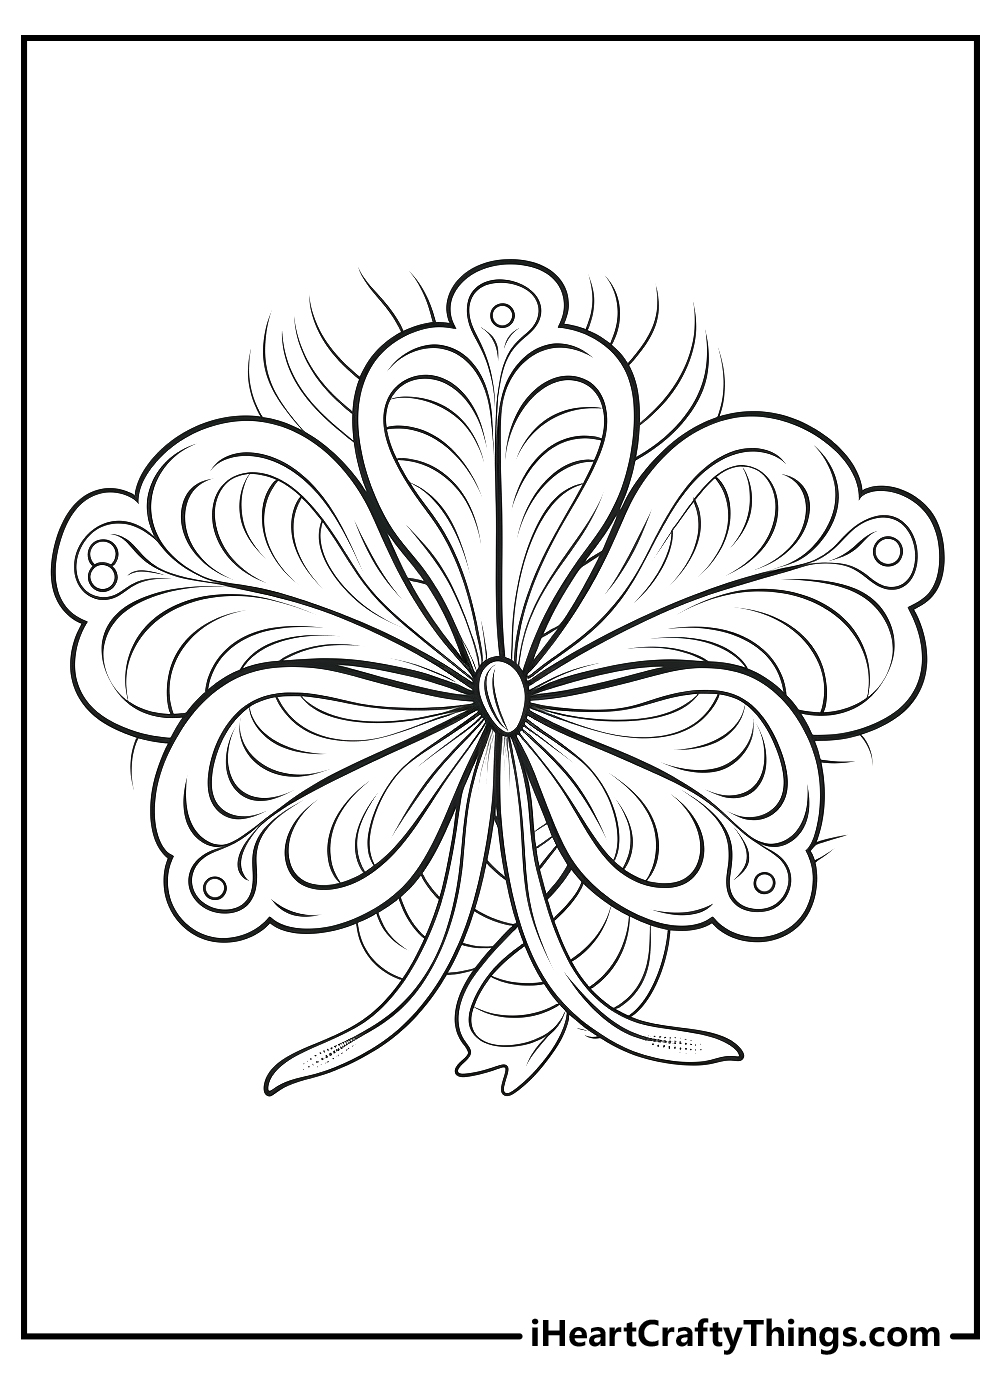 Shamrock coloring pages updated